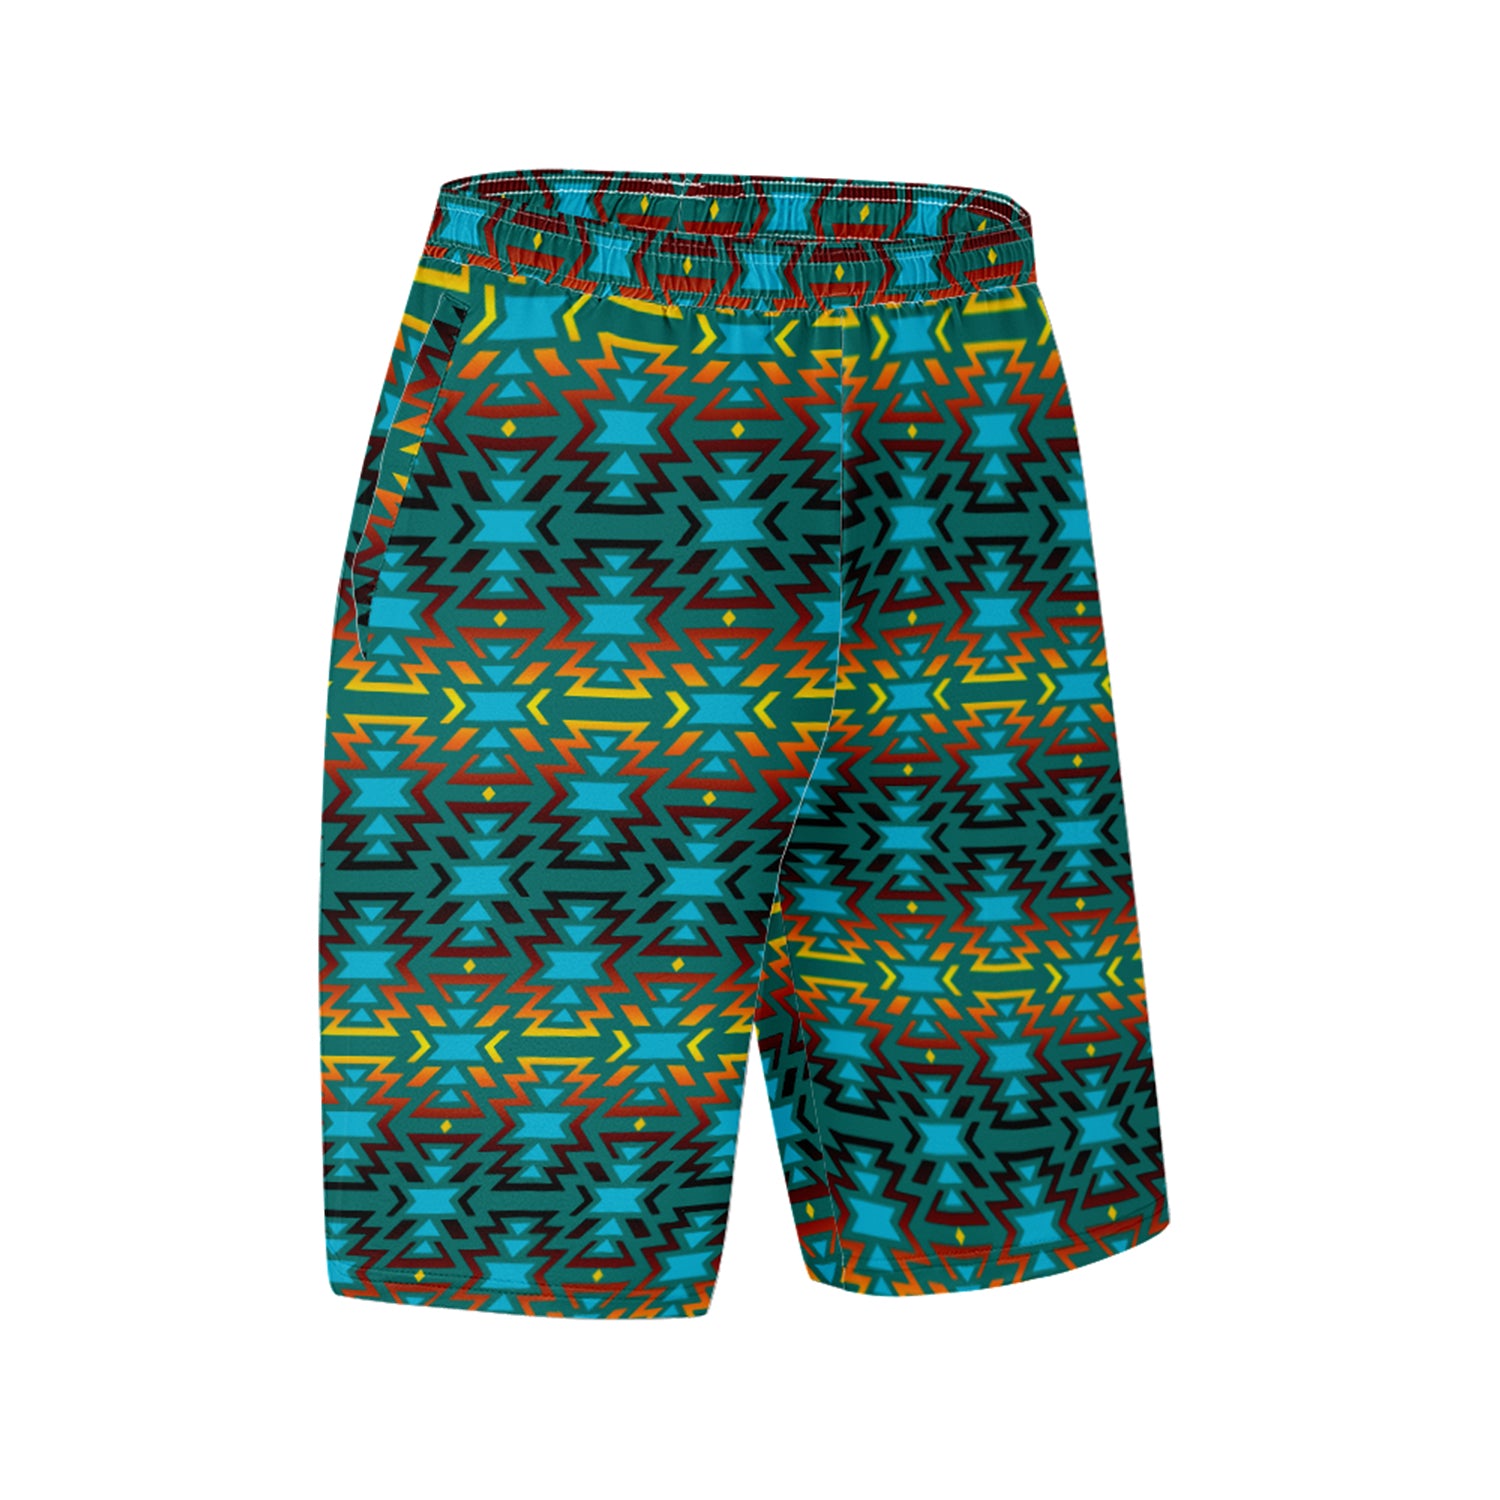 Fire Colors and Turquoise Teal Athletic Shorts with Pockets